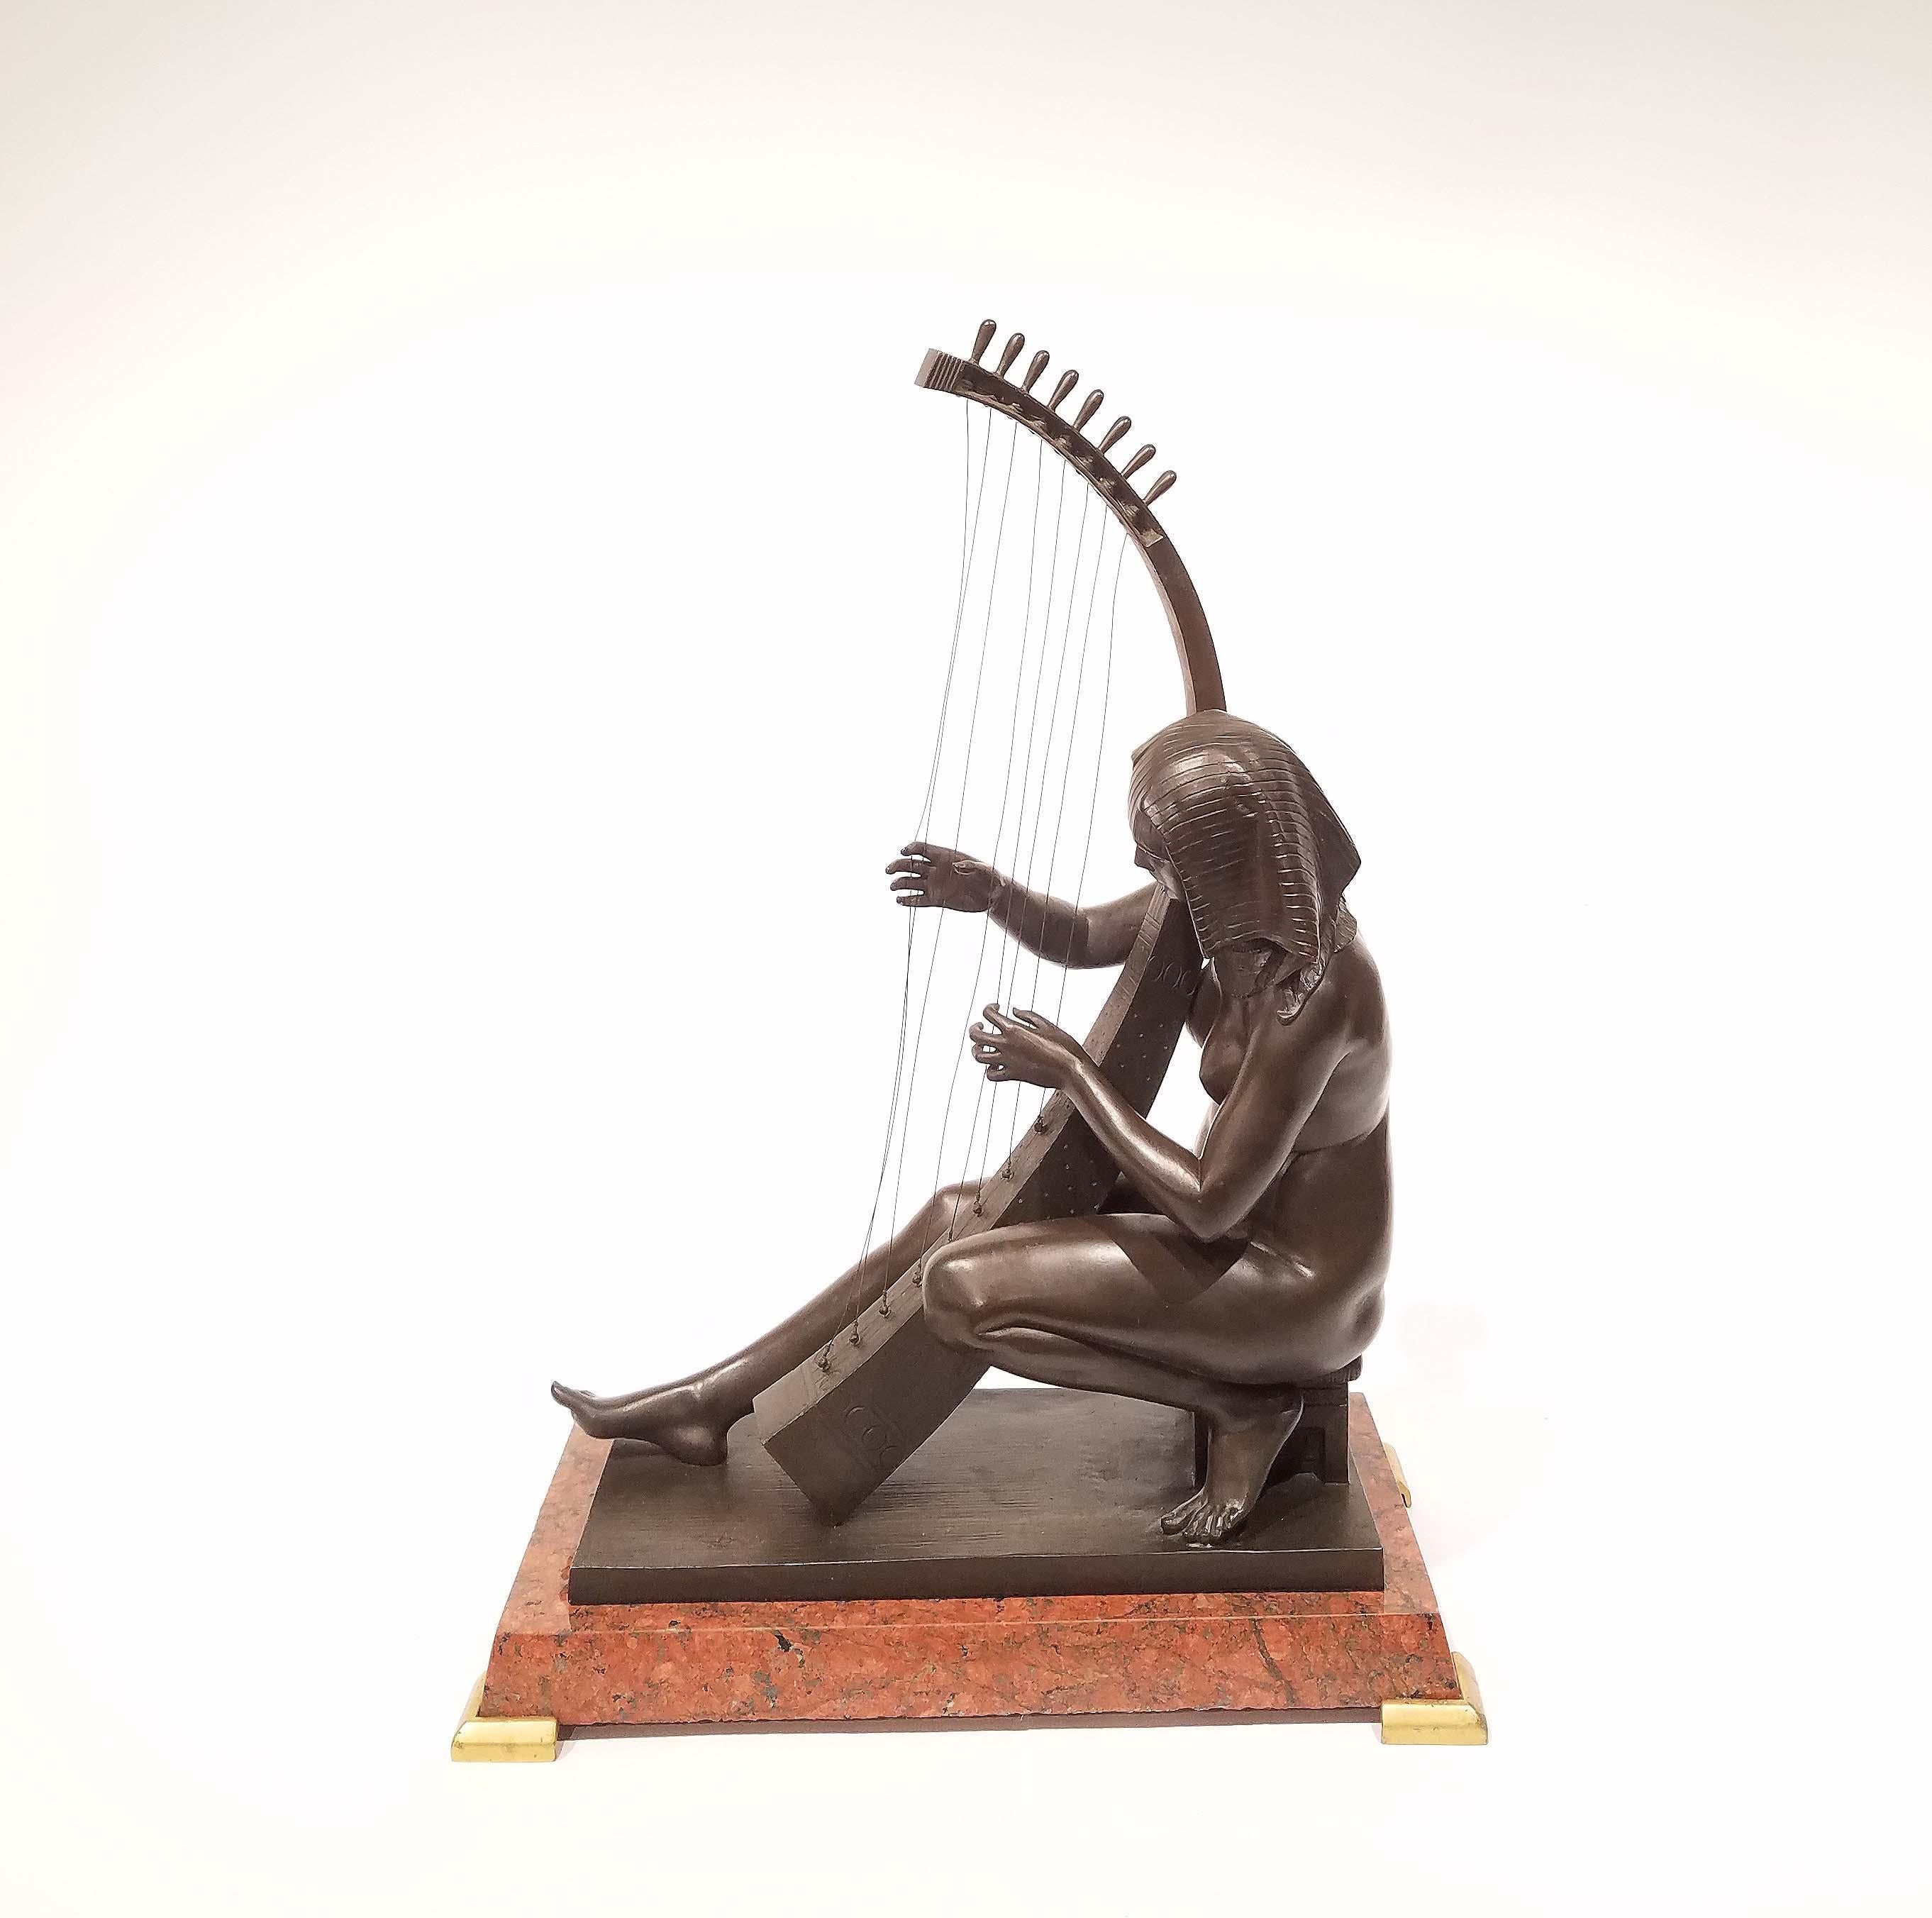 Egyptian Revival Grand Tour bronze of maiden playing a harp. Patinated bronze in rich brown/black on a granite base. Wonderful details. Measures: Over all 20